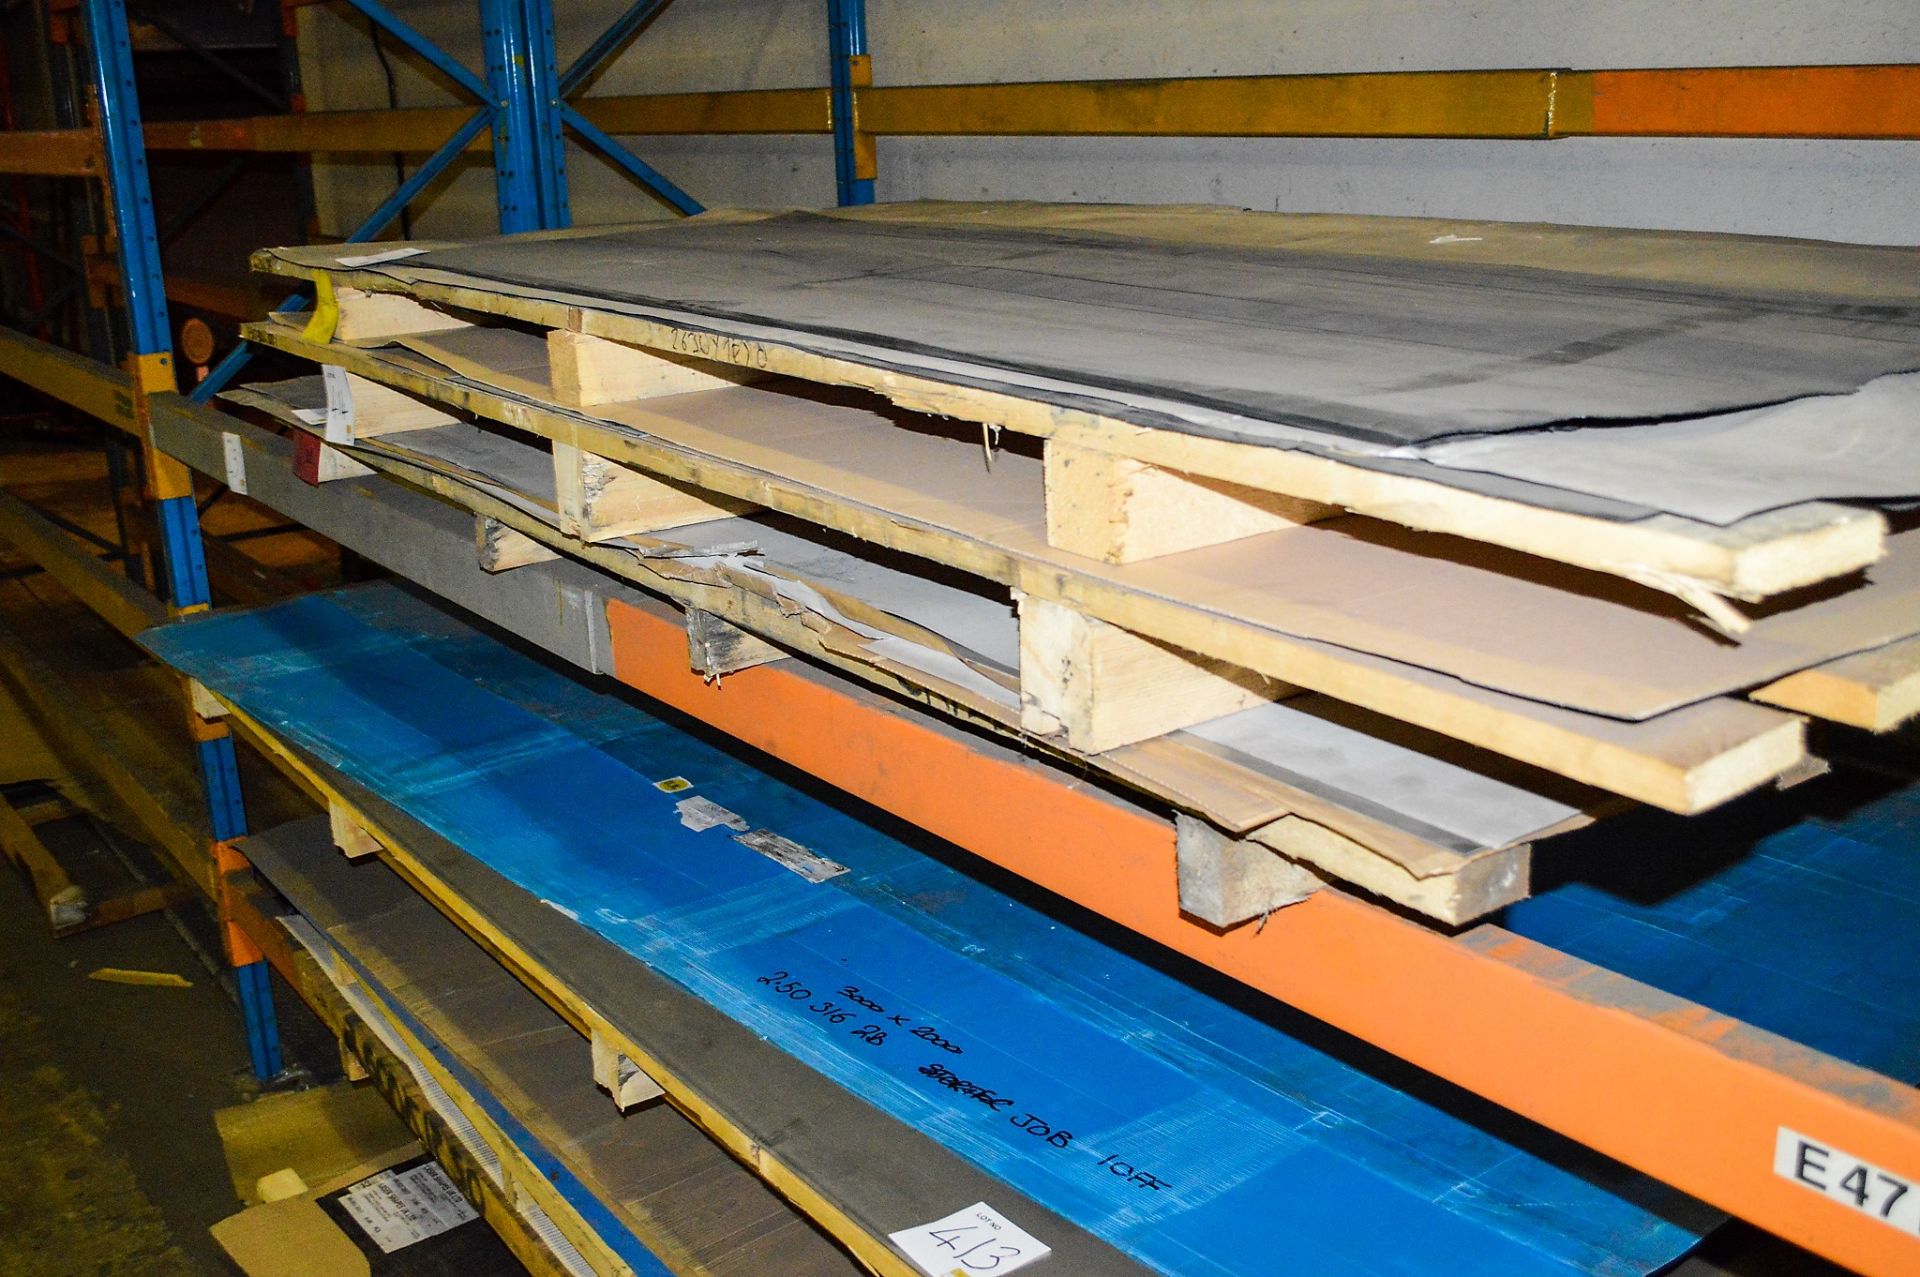 Approximately 8 0.6 to 2mm stainless steel sheets